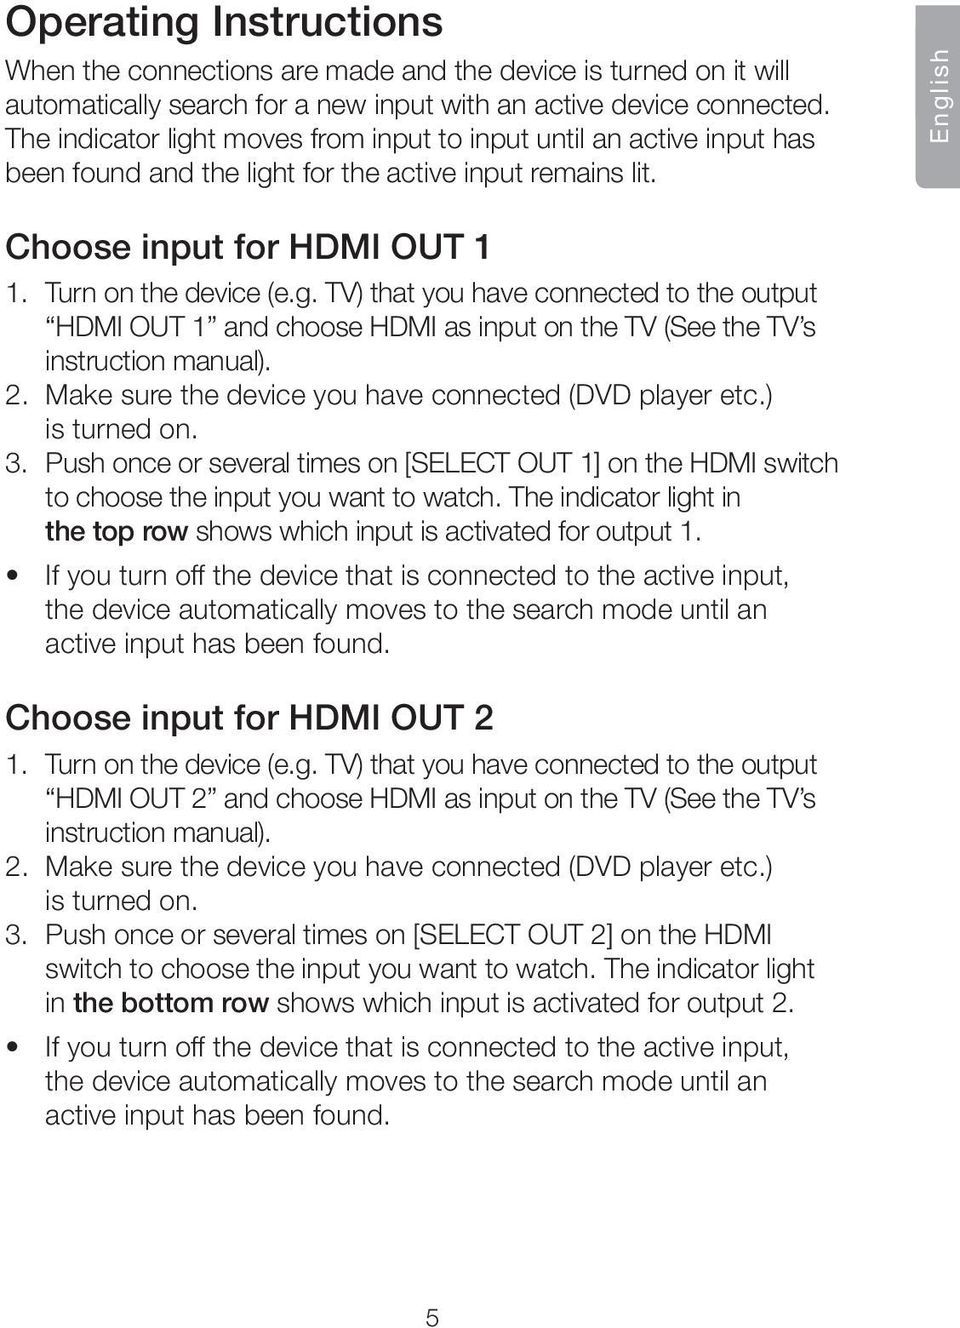 2. Make sure the device you have connected (DVD player etc.) is turned on. 3. Push once or several times on [SELECT OUT 1] on the HDMI switch to choose the input you want to watch.